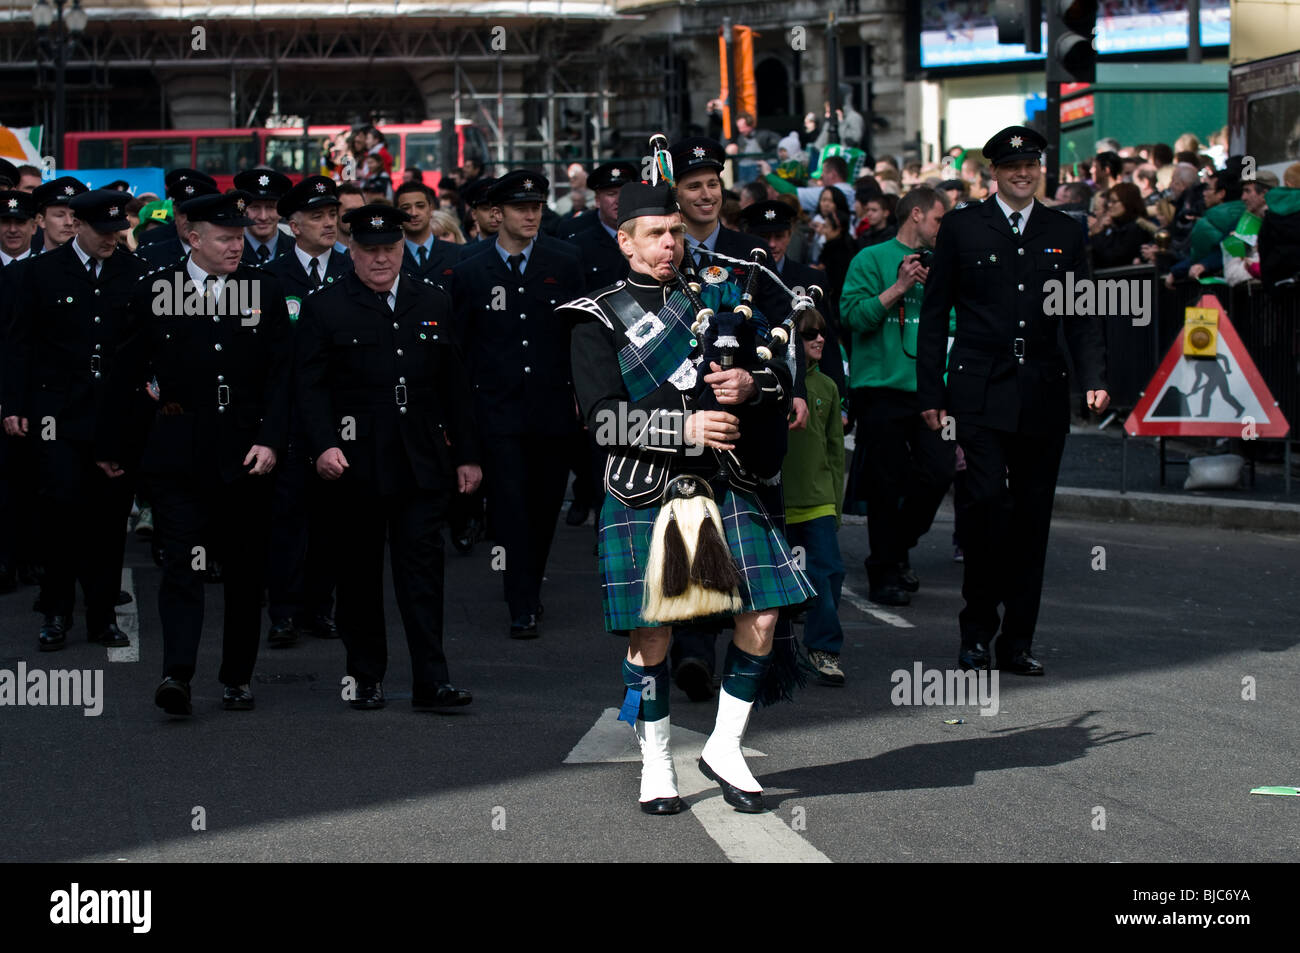 A piper leading a parade of fire fighters during the St Patricks Day Parade in London. Stock Photo